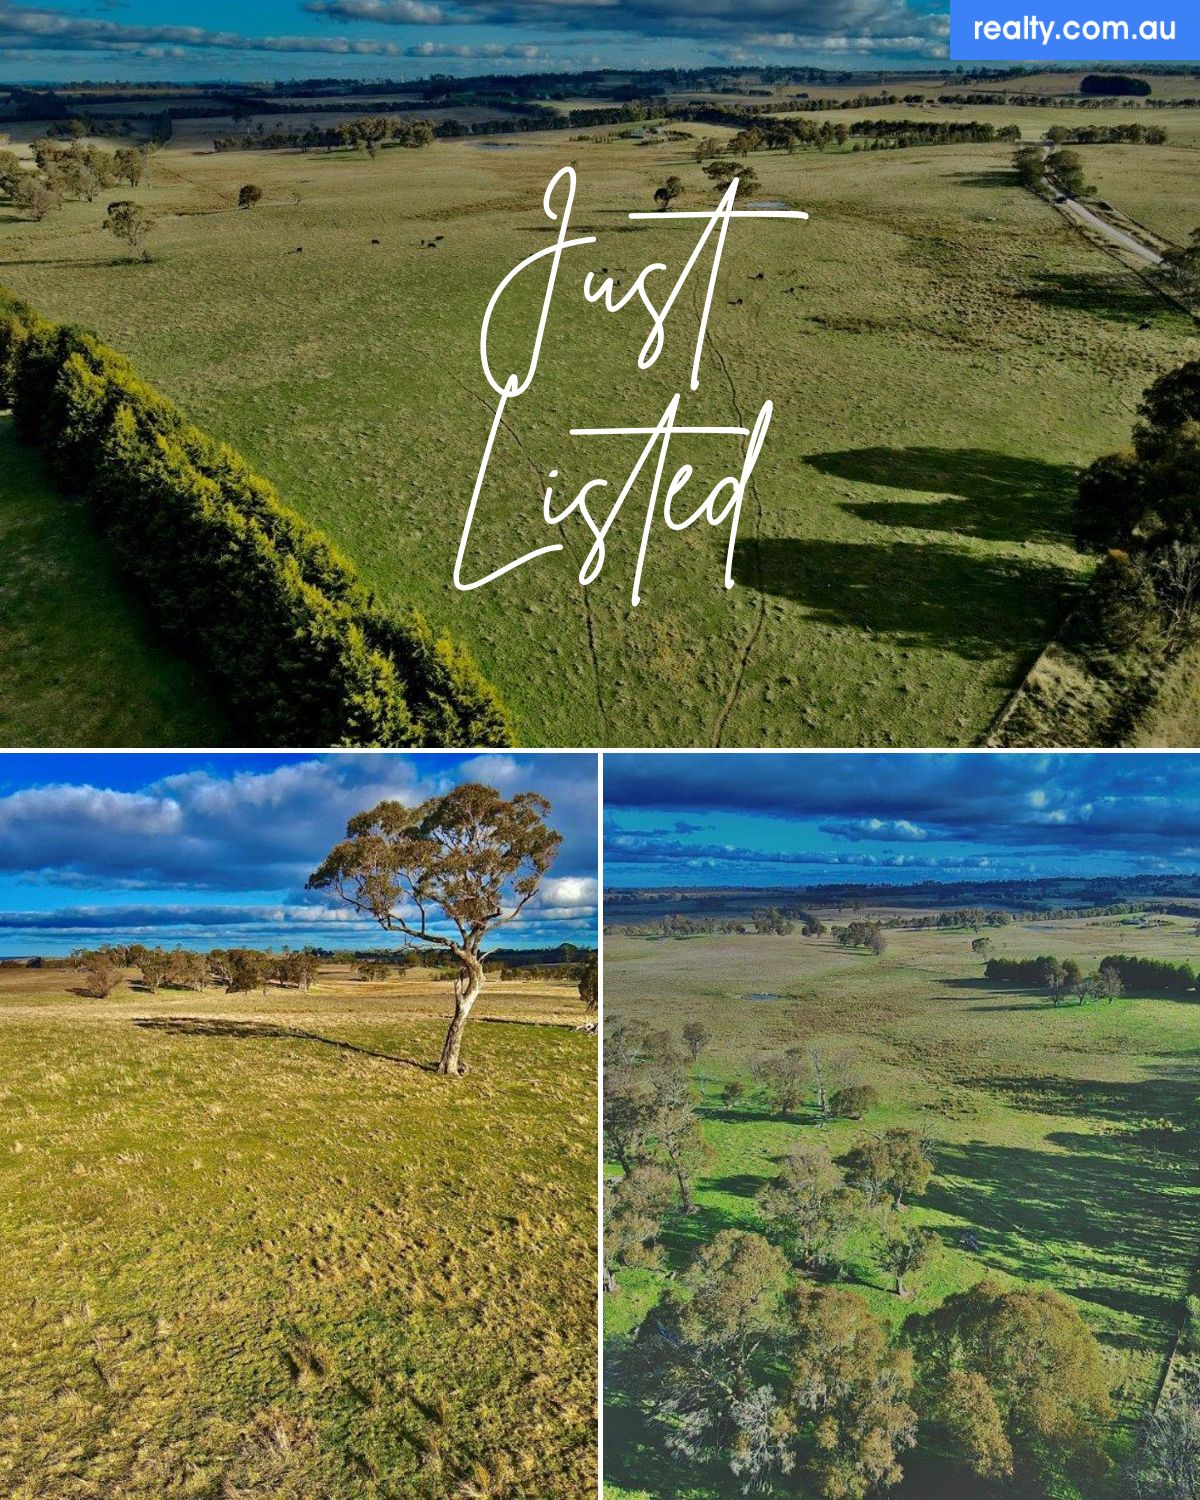 Lot 4 DP1119332 Mount Rae Road Roslyn, Crookwell, NSW 2583 | Realty.com.au